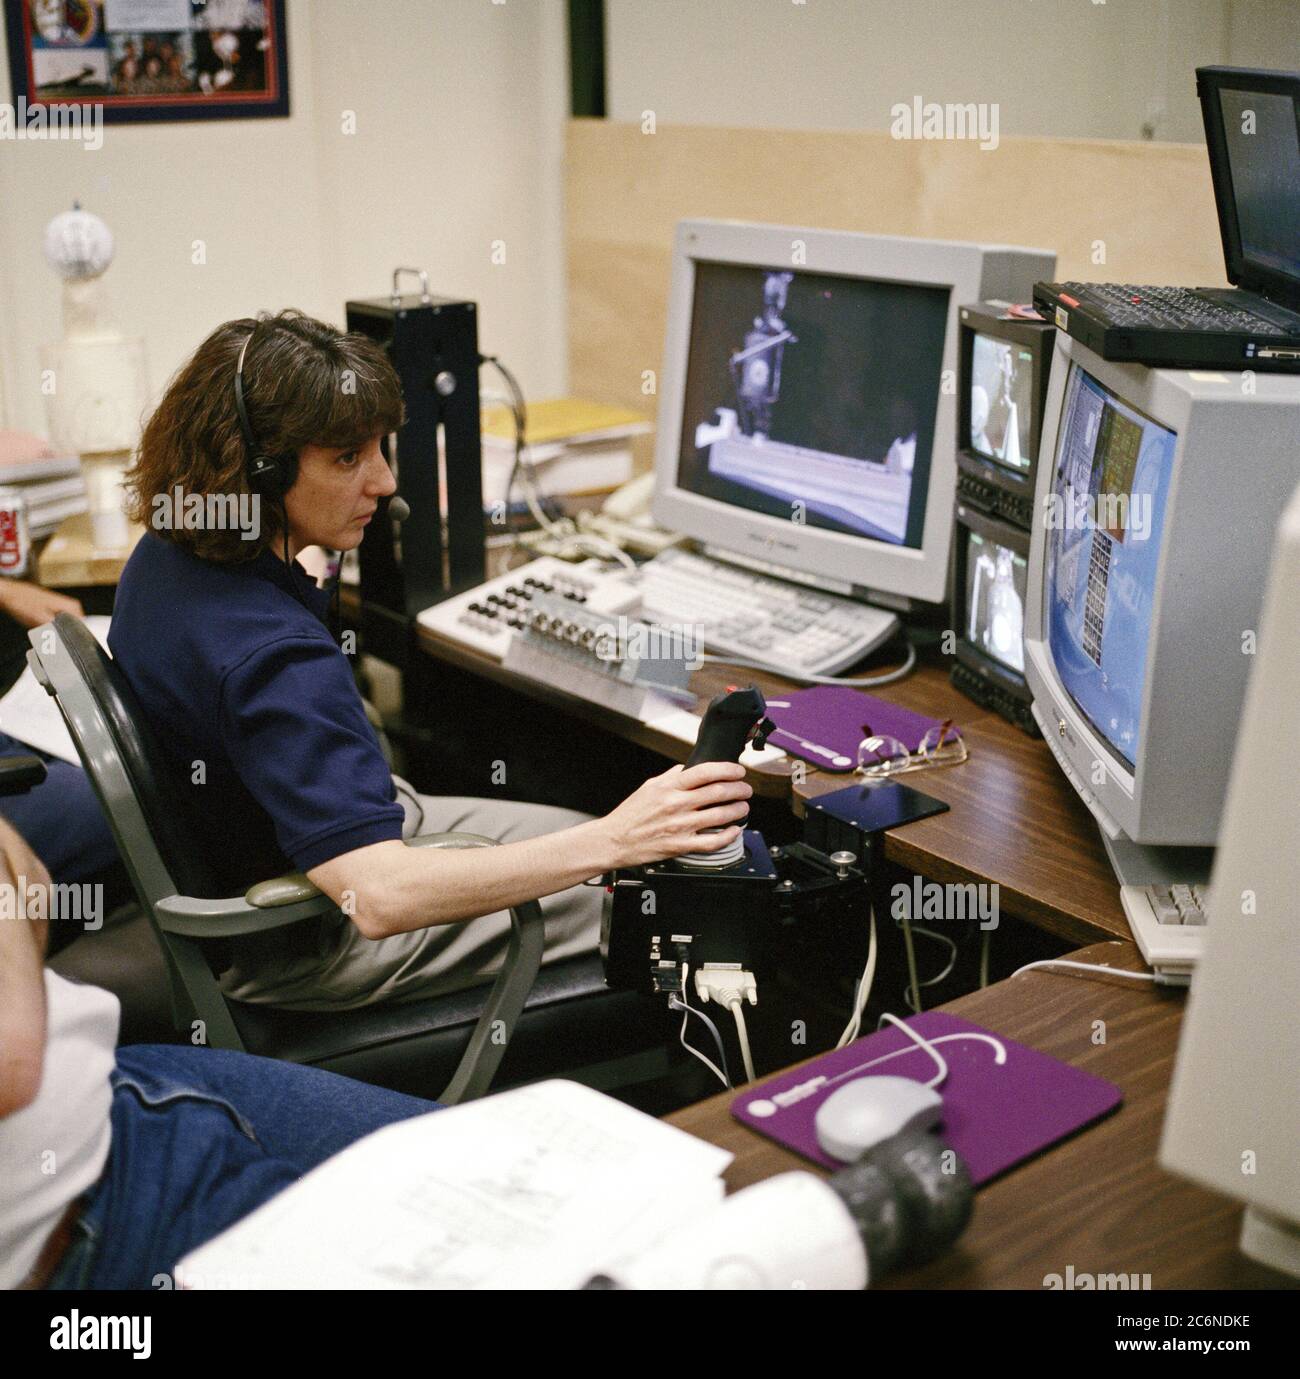 (8 Apr. 1998) --- Astronaut Nancy J. Currie, assigned as a mission specialist for the mission, uses hardware in the virtual reality lab at the Johnson Space Center (JSC) to train for her duties aboard the Space Shuttle Endeavour.  This type computer interface paired with virtual reality training hardware for the assigned space-walking astronauts -- in this case, Jerry L. Ross and James H. Newman -- helps to prepare the entire team for dealing with International Space Station (ISS) elements. Stock Photo